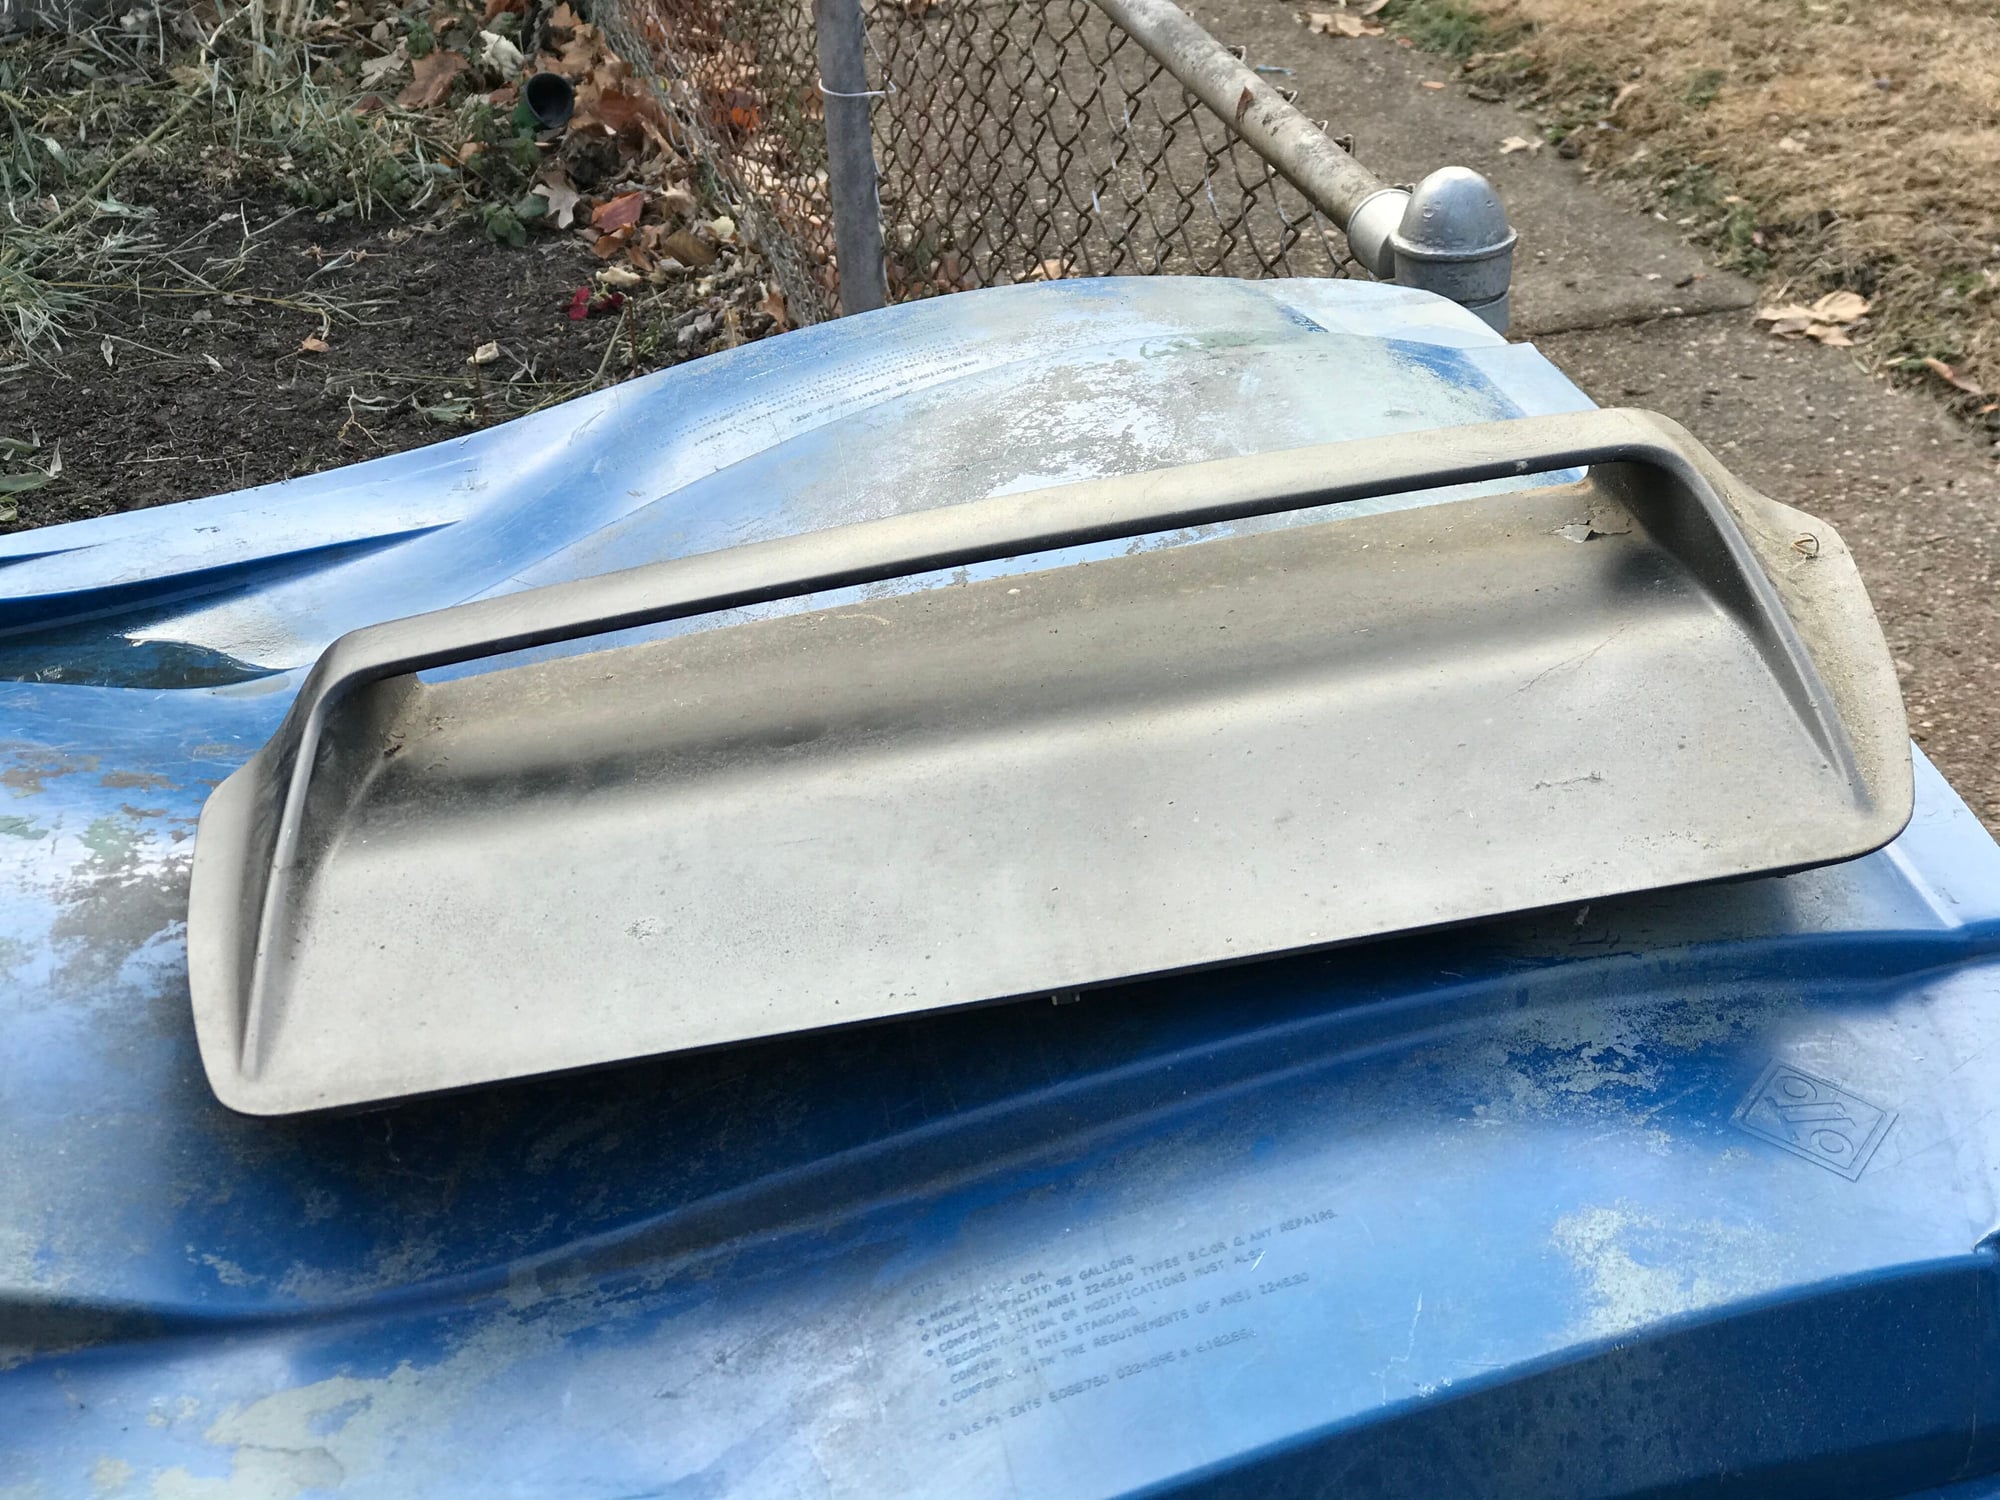 Exterior Body Parts - Aluminum Turbo 2 hood - Used - 1986 to 1991 Mazda RX-7 - St. Louis, MO 63114, United States